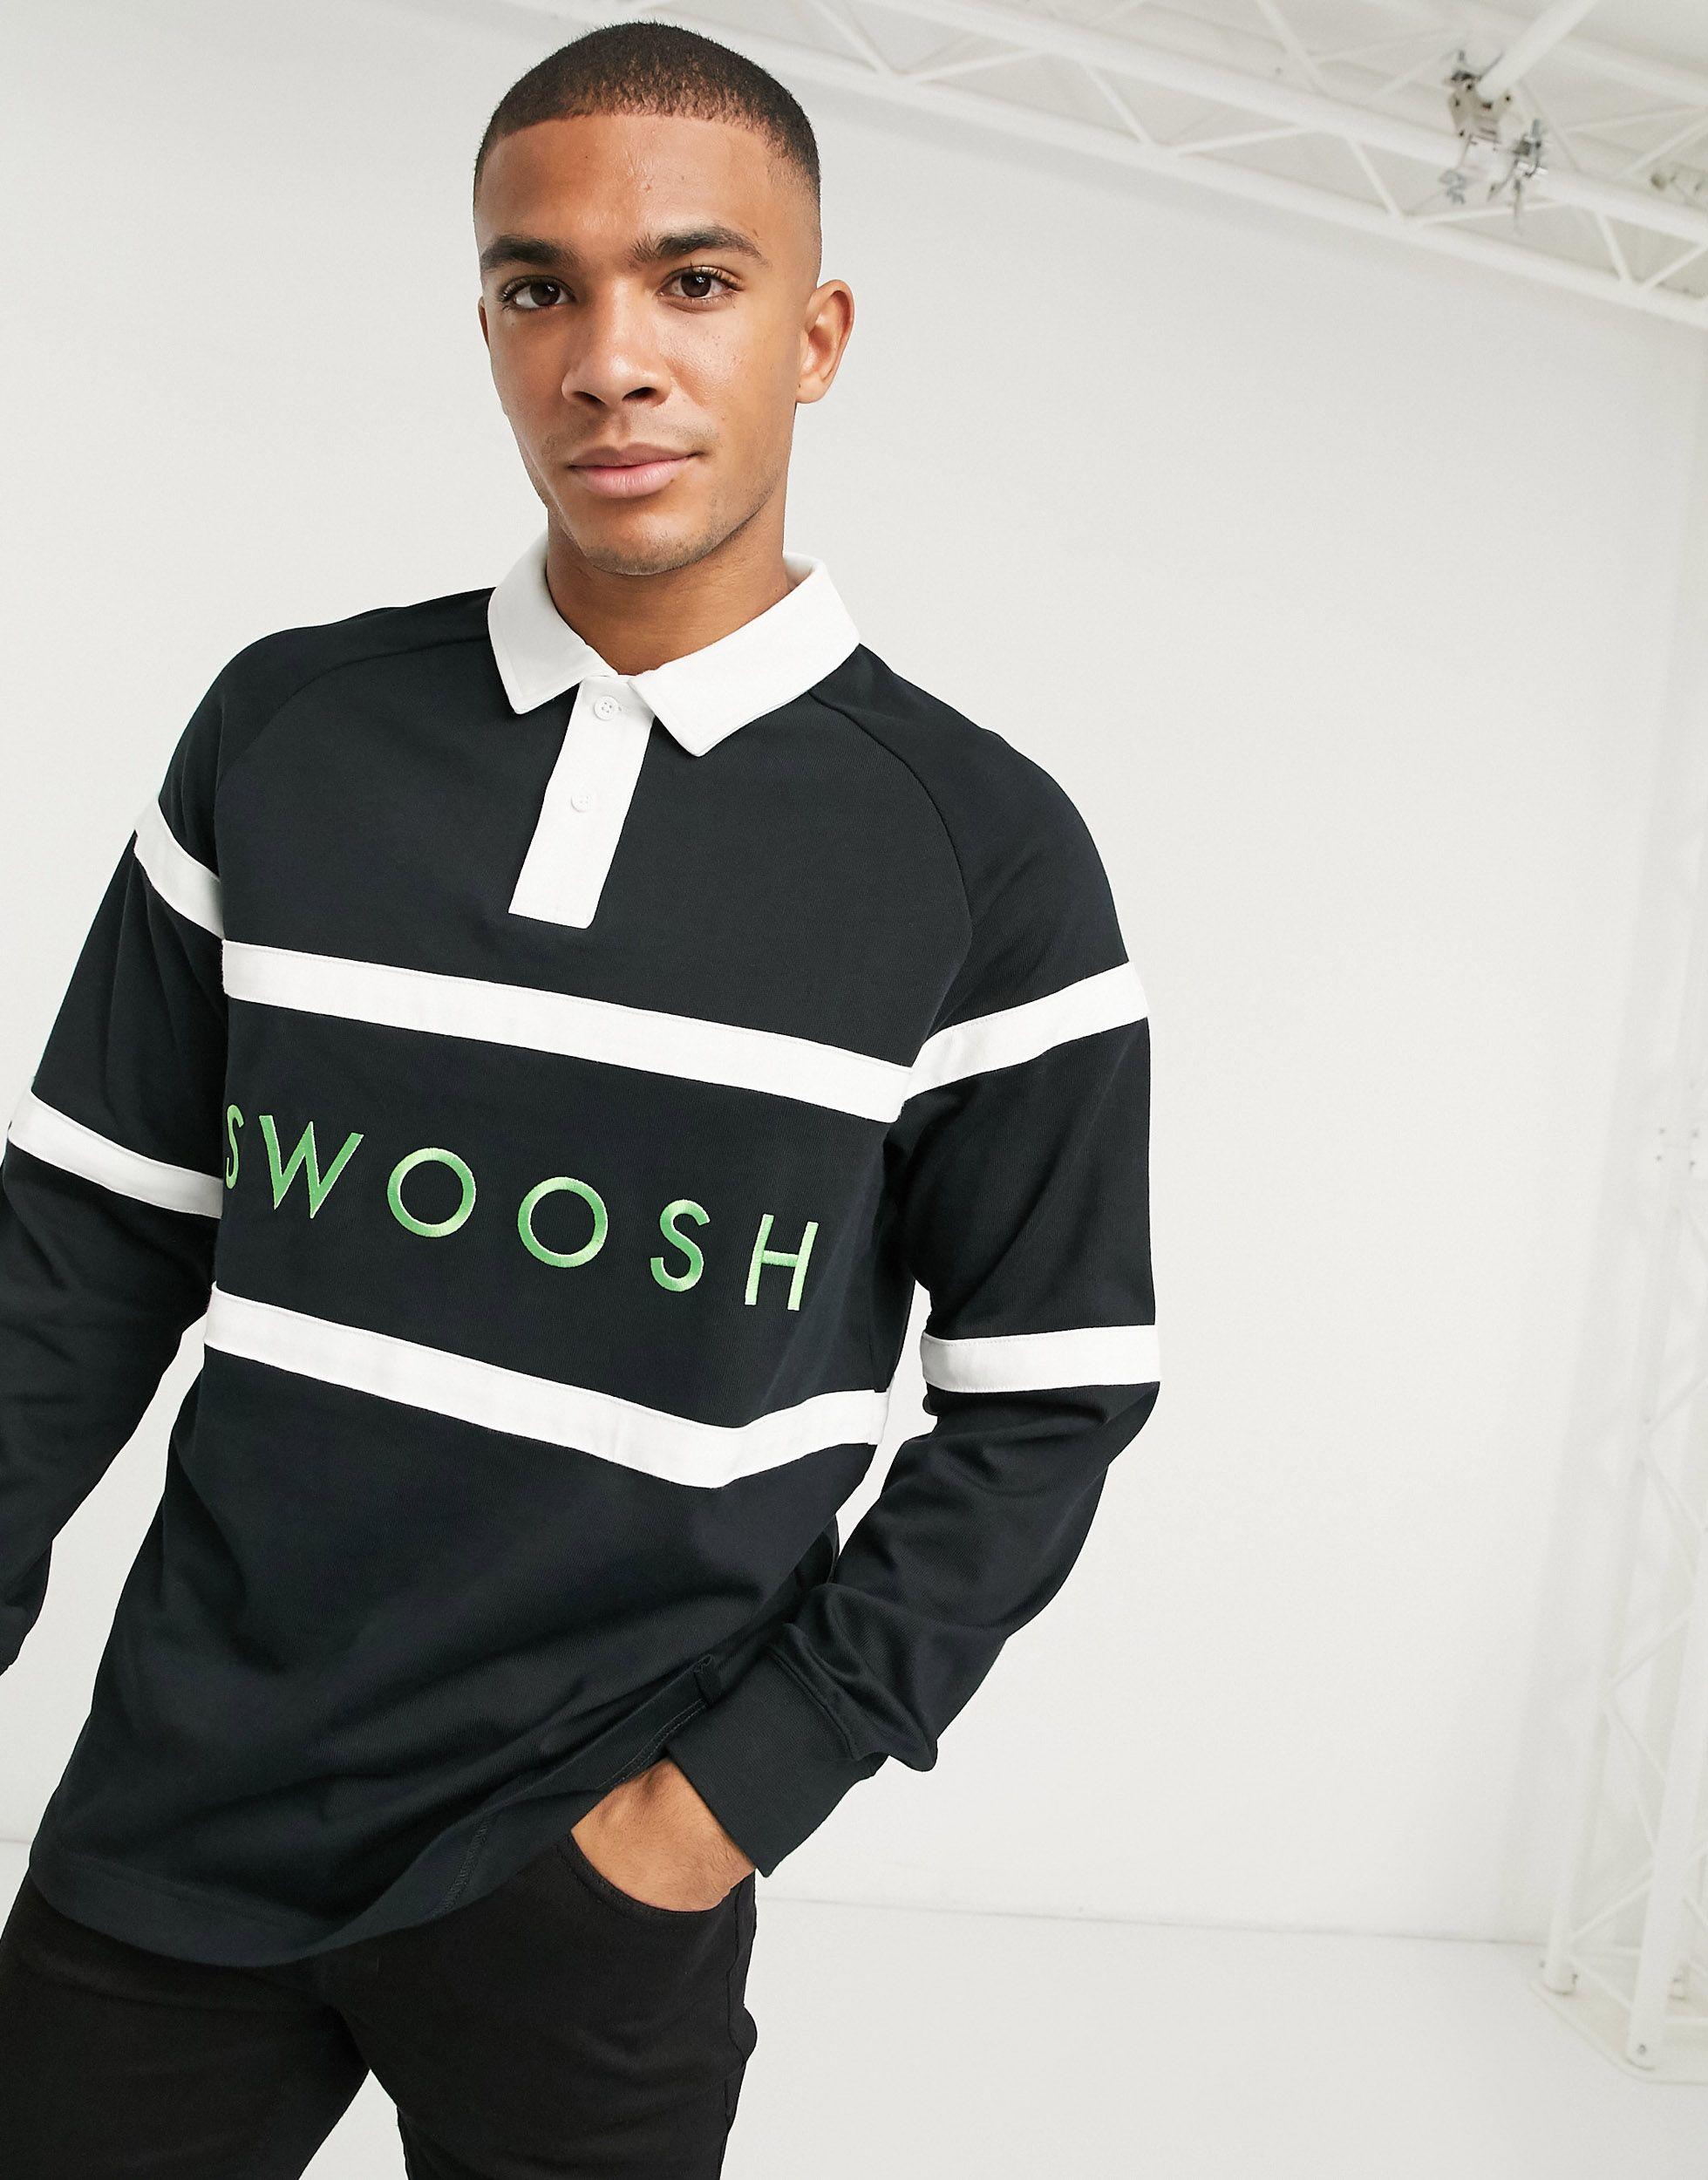 Nike Swoosh Rugby Shirt in Black for Men - Lyst